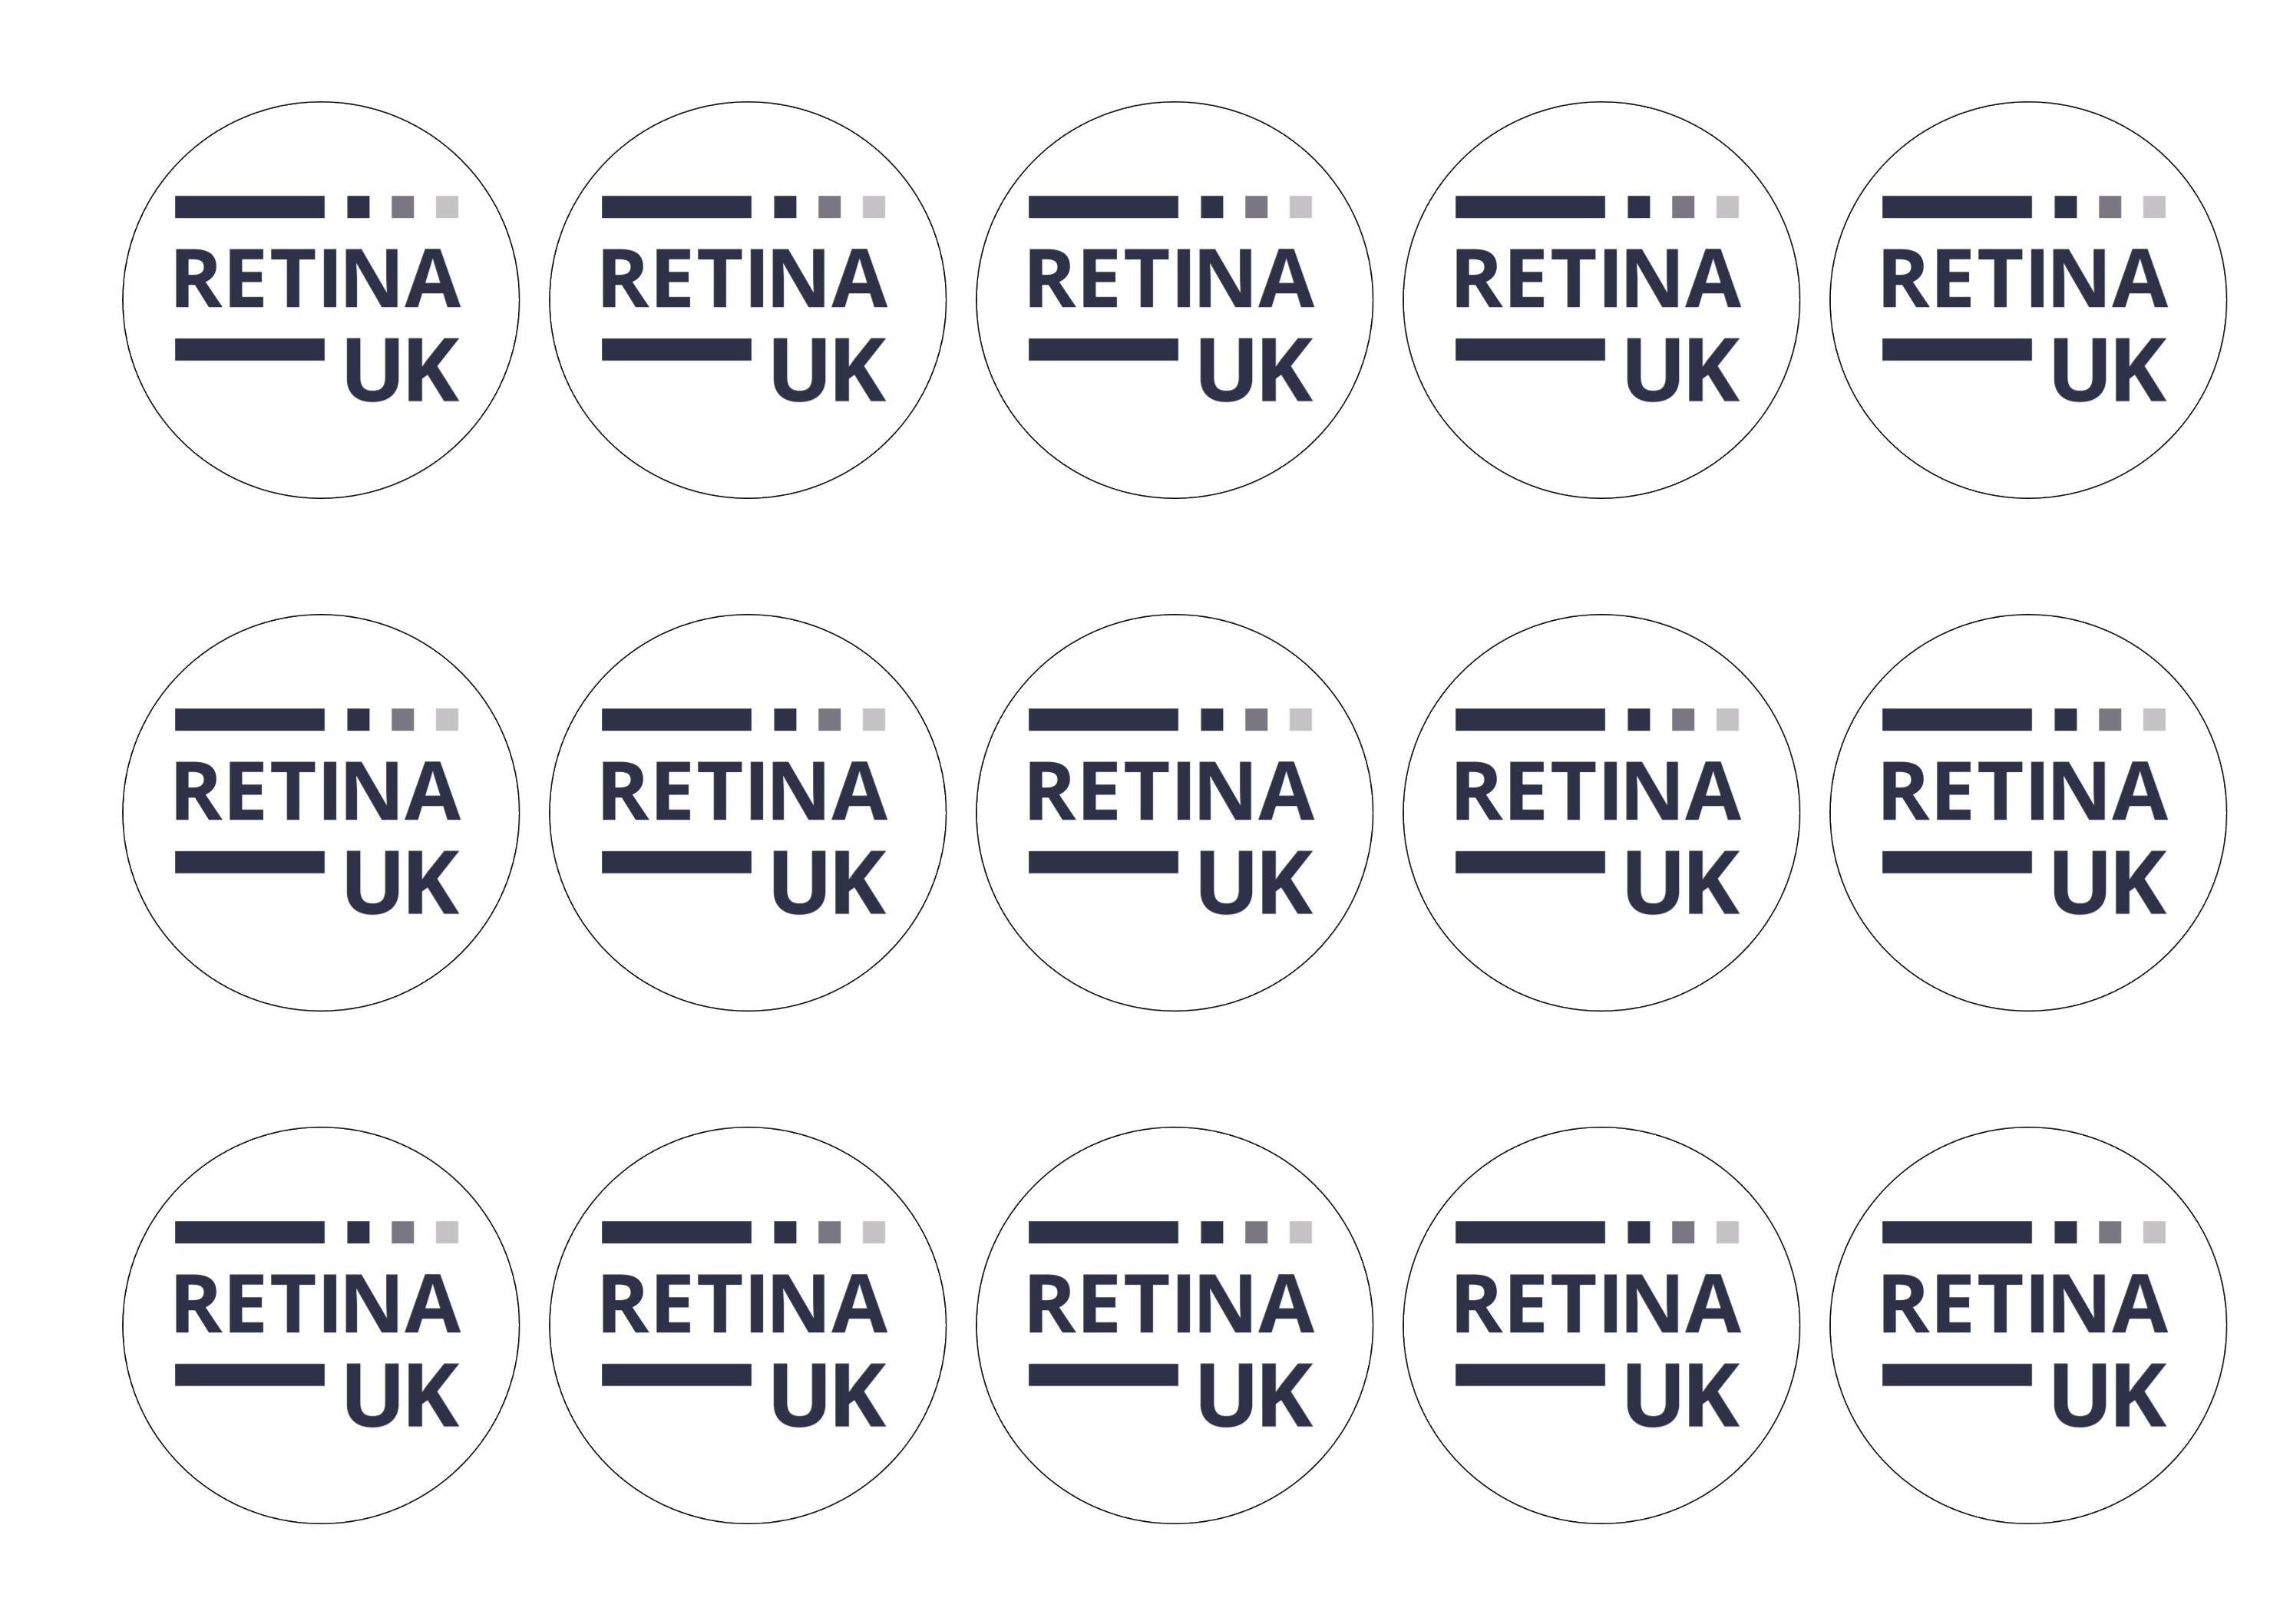 15 printed toppers with the Retina UK logo